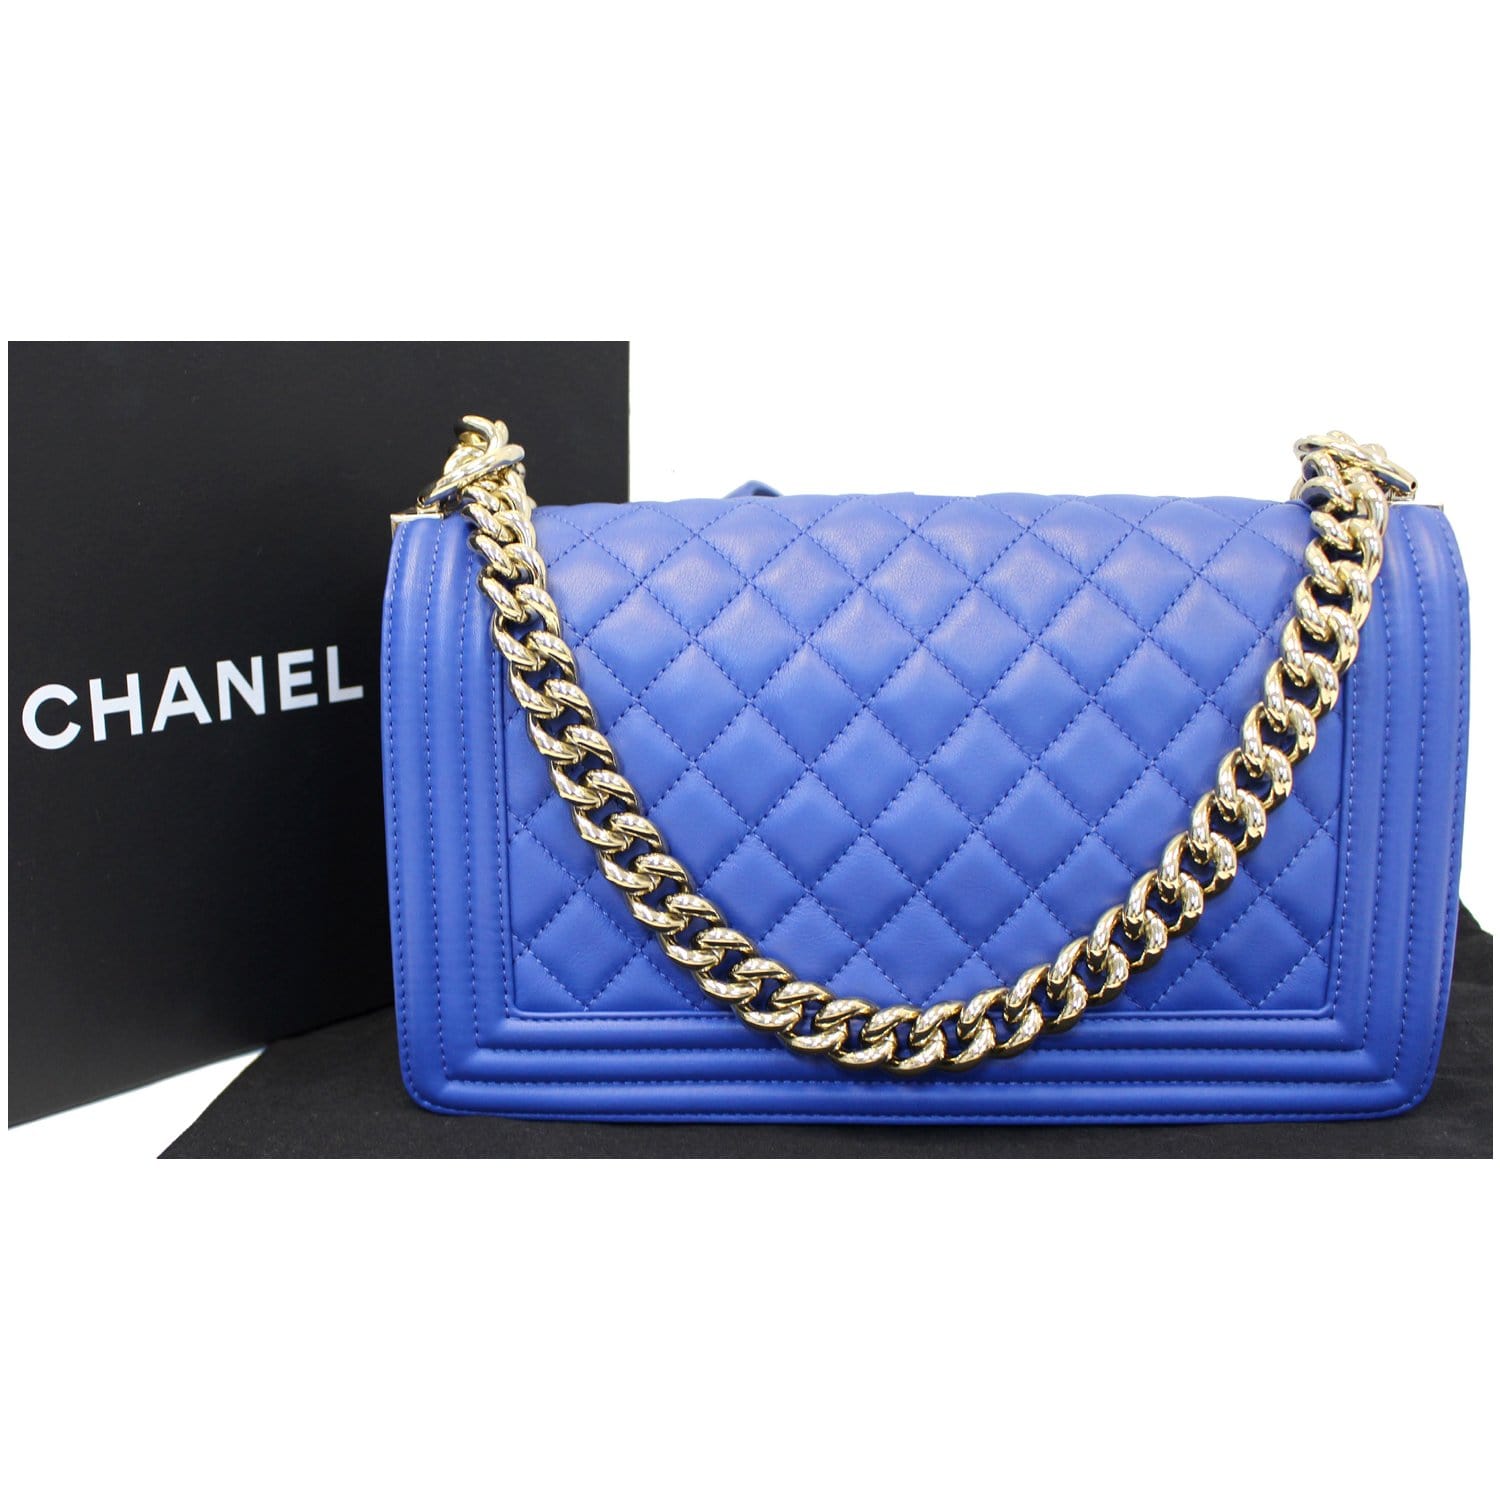 Chanel CCpurse Sac Class rabat Patton leather navy blue and silver shoulder  bag￼